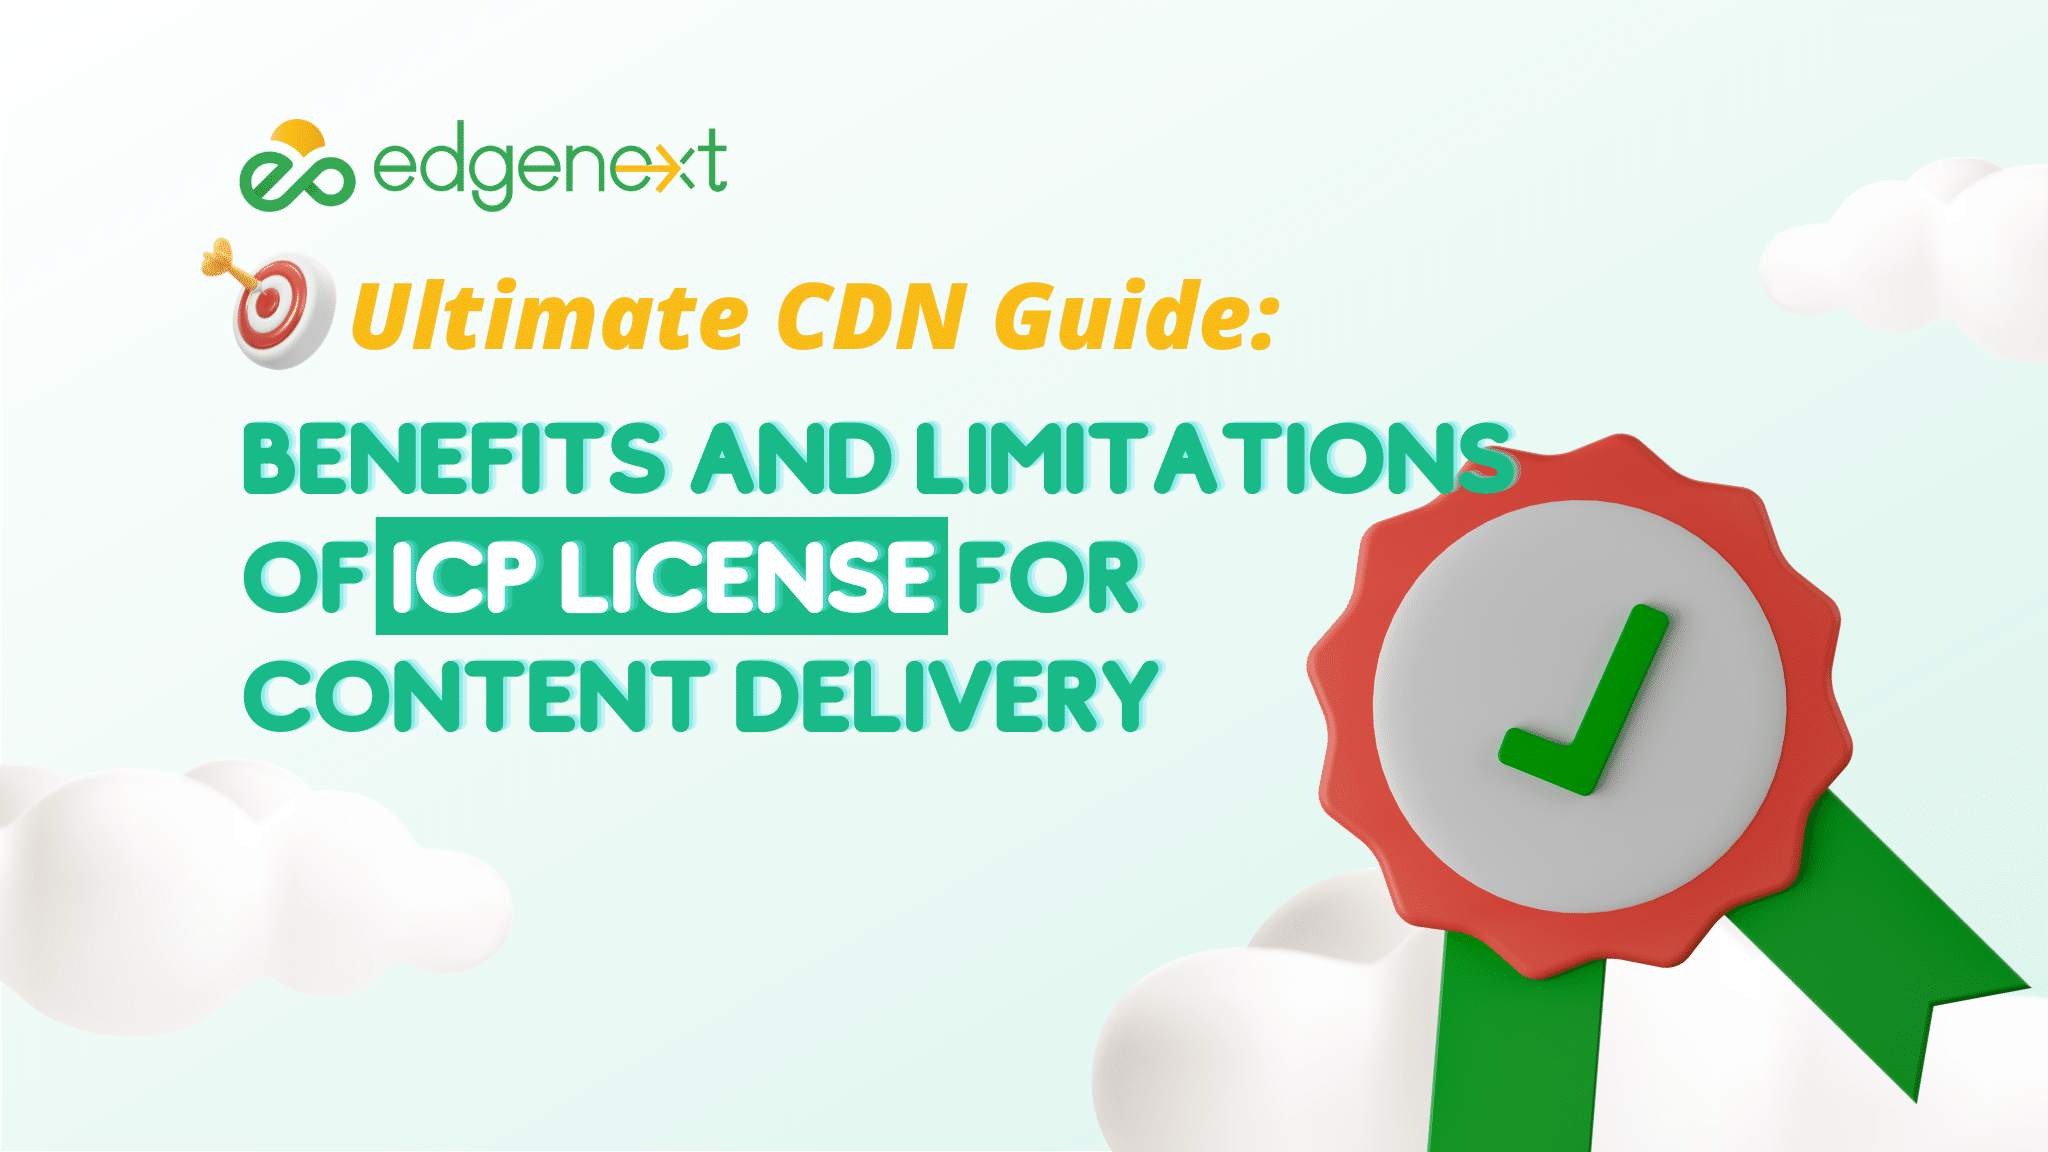 Benefits and Limitations of ICP License for Content Delivery